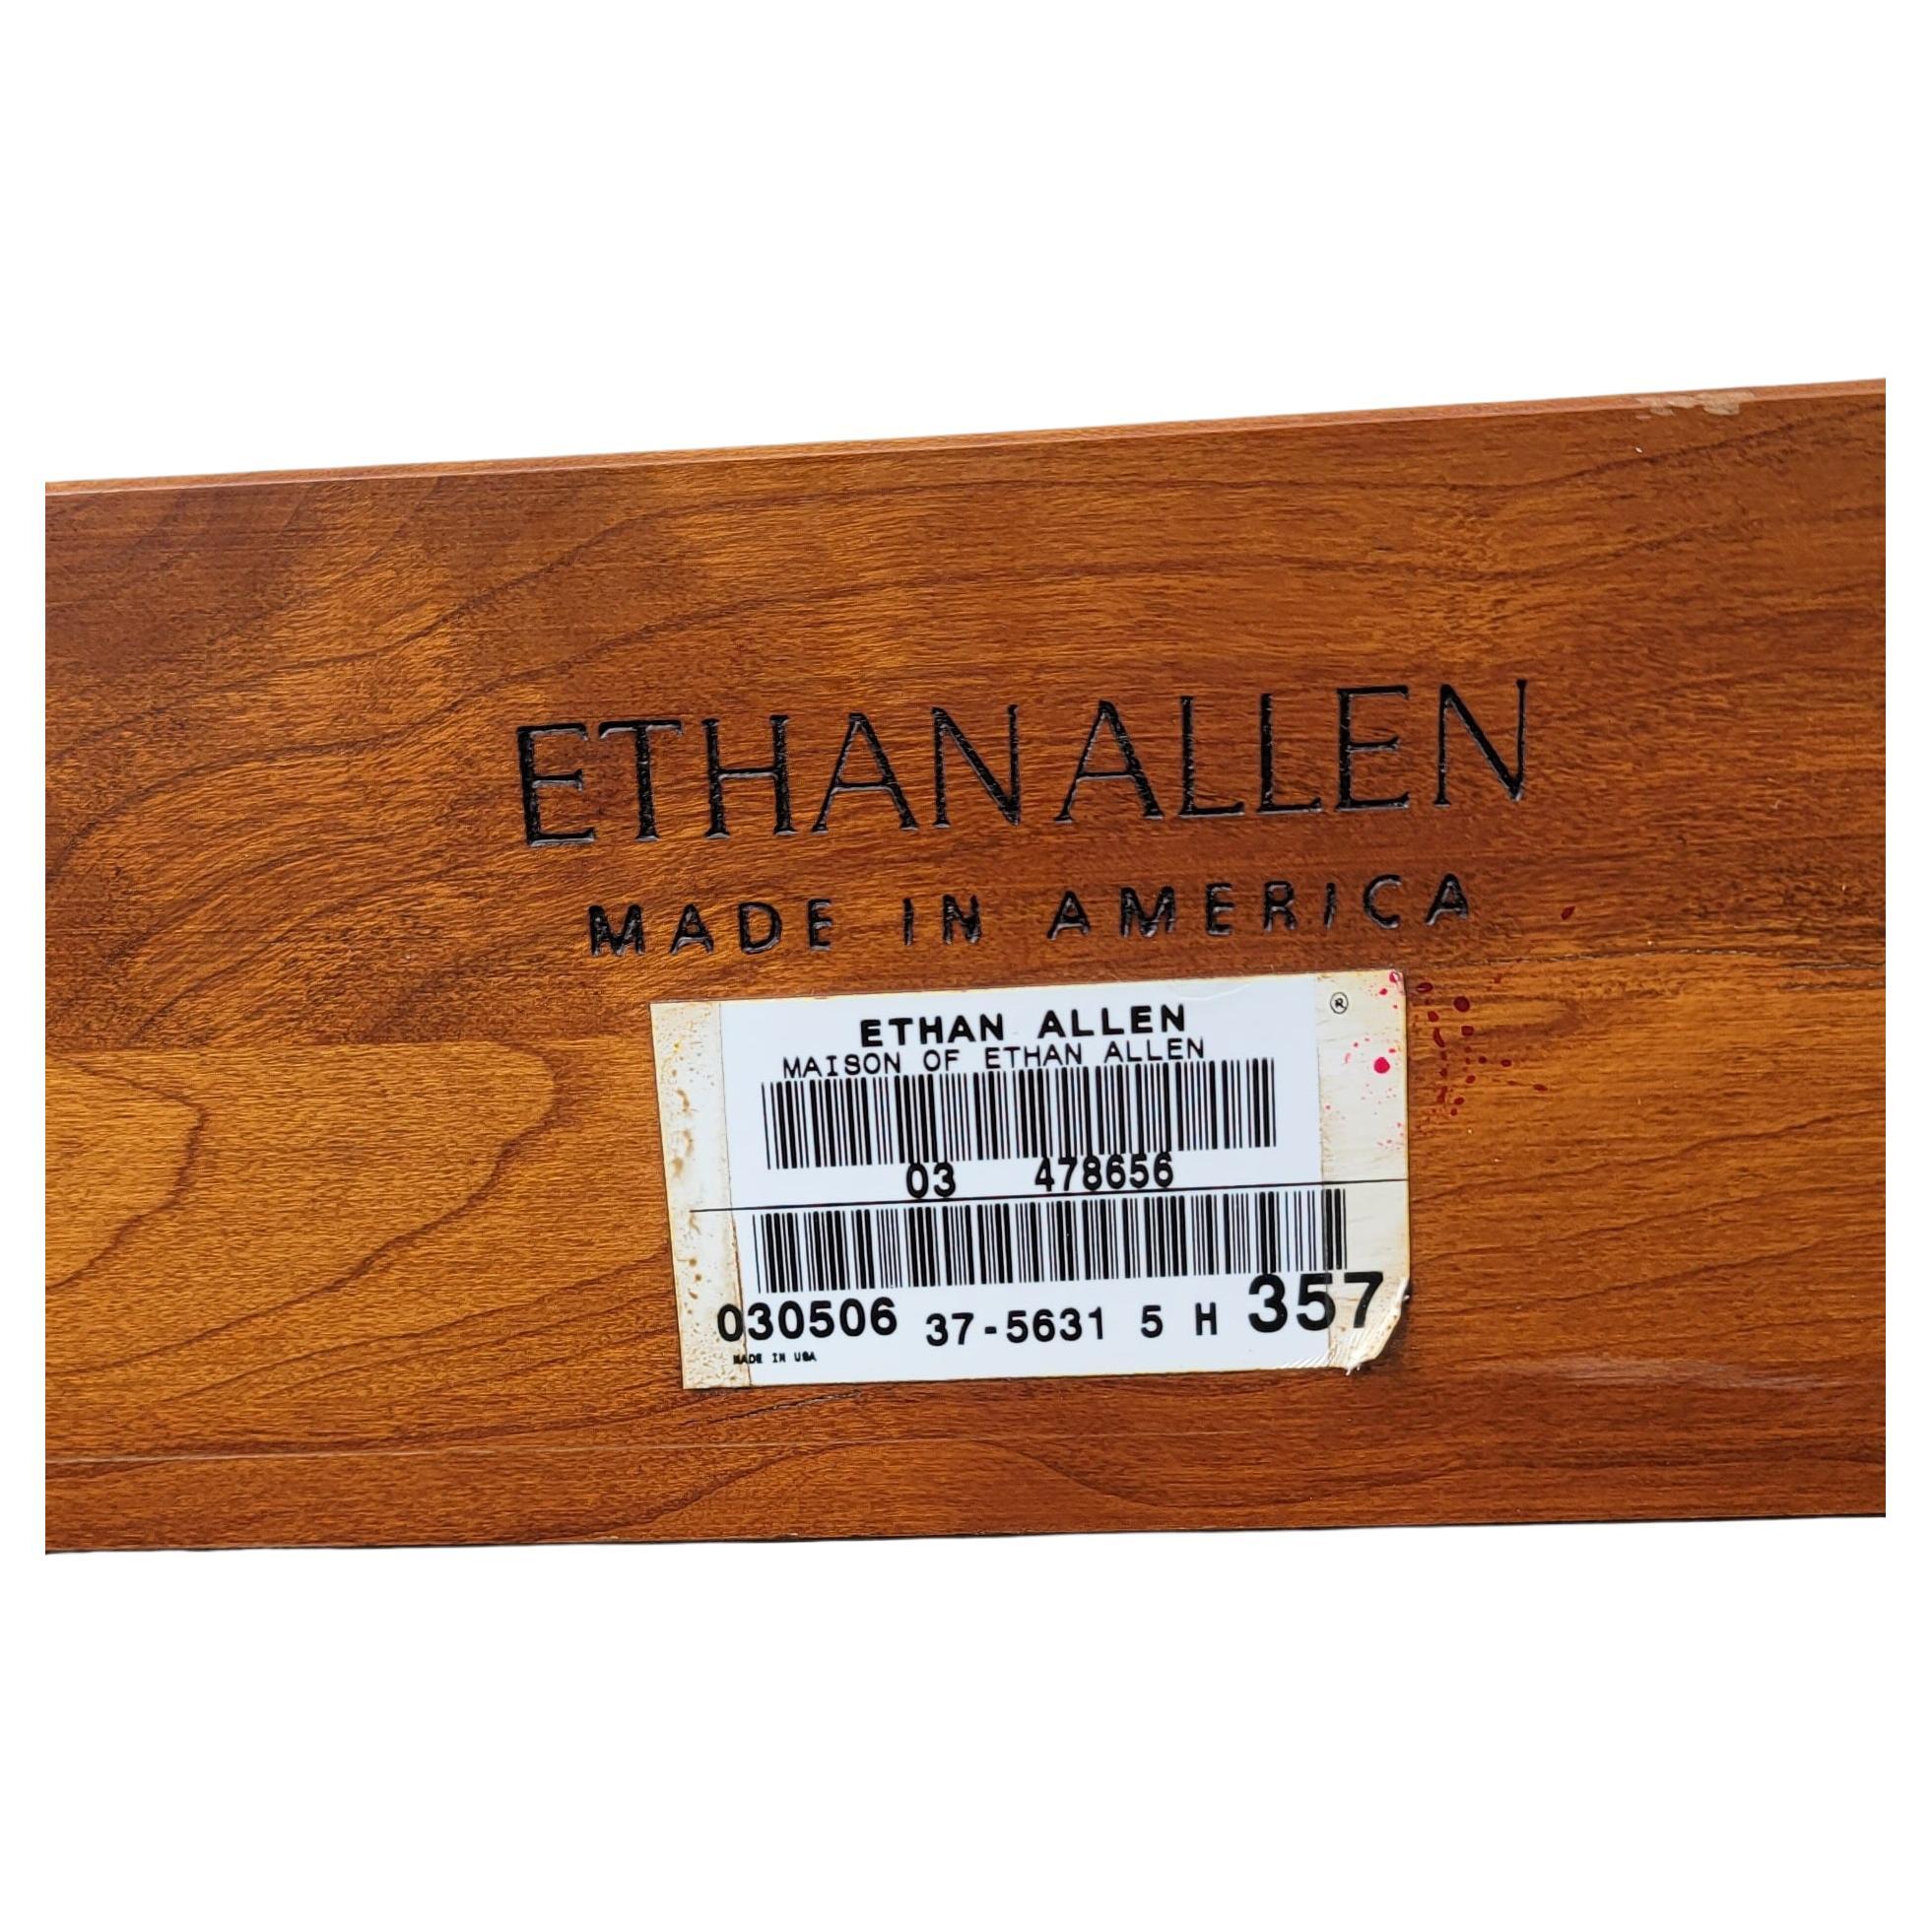 For those who desire simple refinement, Ethan Allen's French Country collection is Parisian perfection. This Wheatback Queen / Full size headboard is finely crafted of birch with a stain and glazed Provence finish.